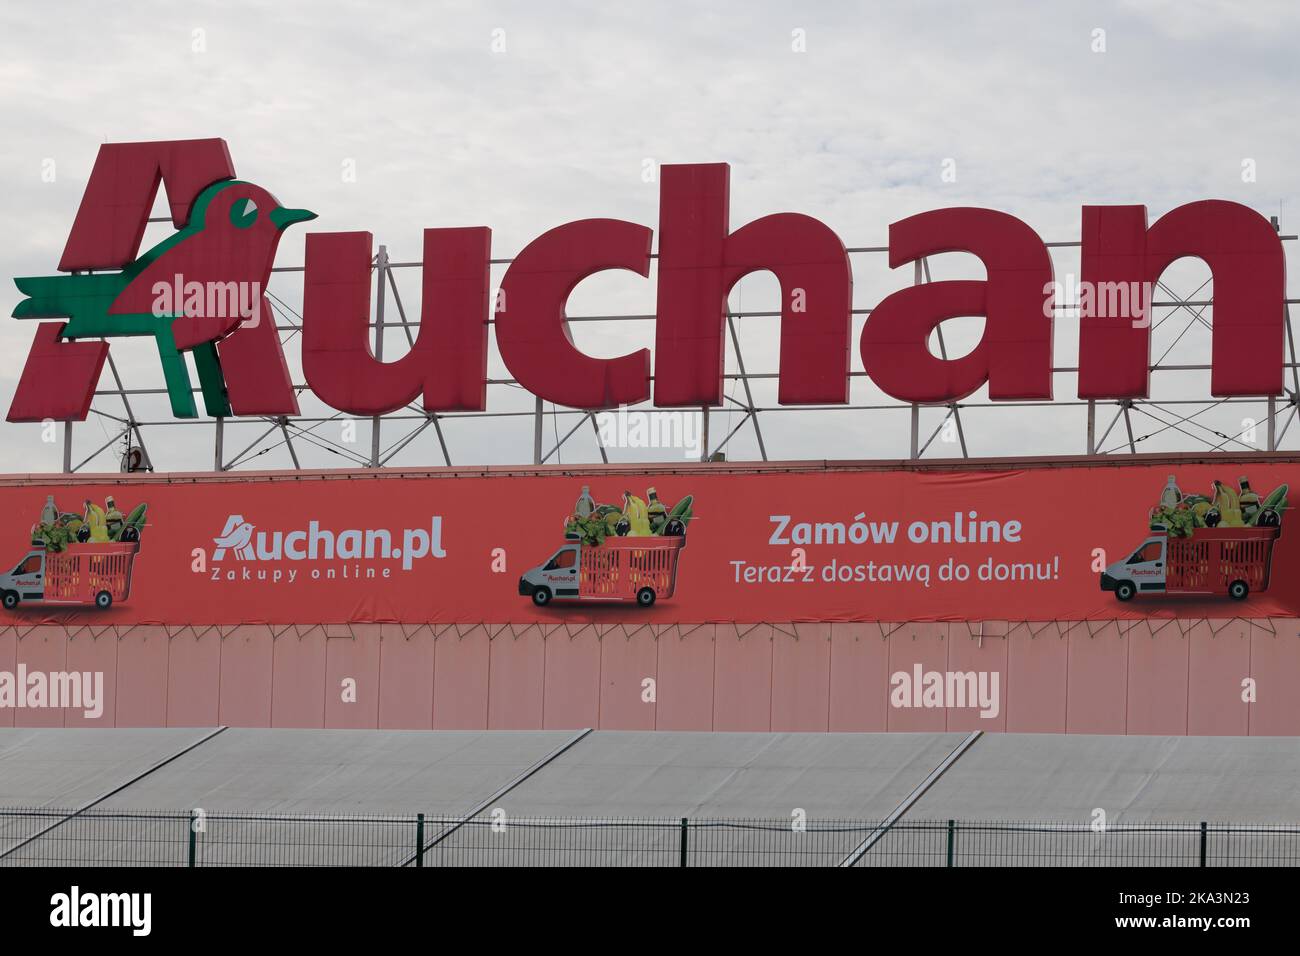 Poland, Poznan - October 30, 2022: Logo or symbol of Auchan in a retail park Auchan is a French chain of hypermarkets, supermarkets and superstores. Stock Photo